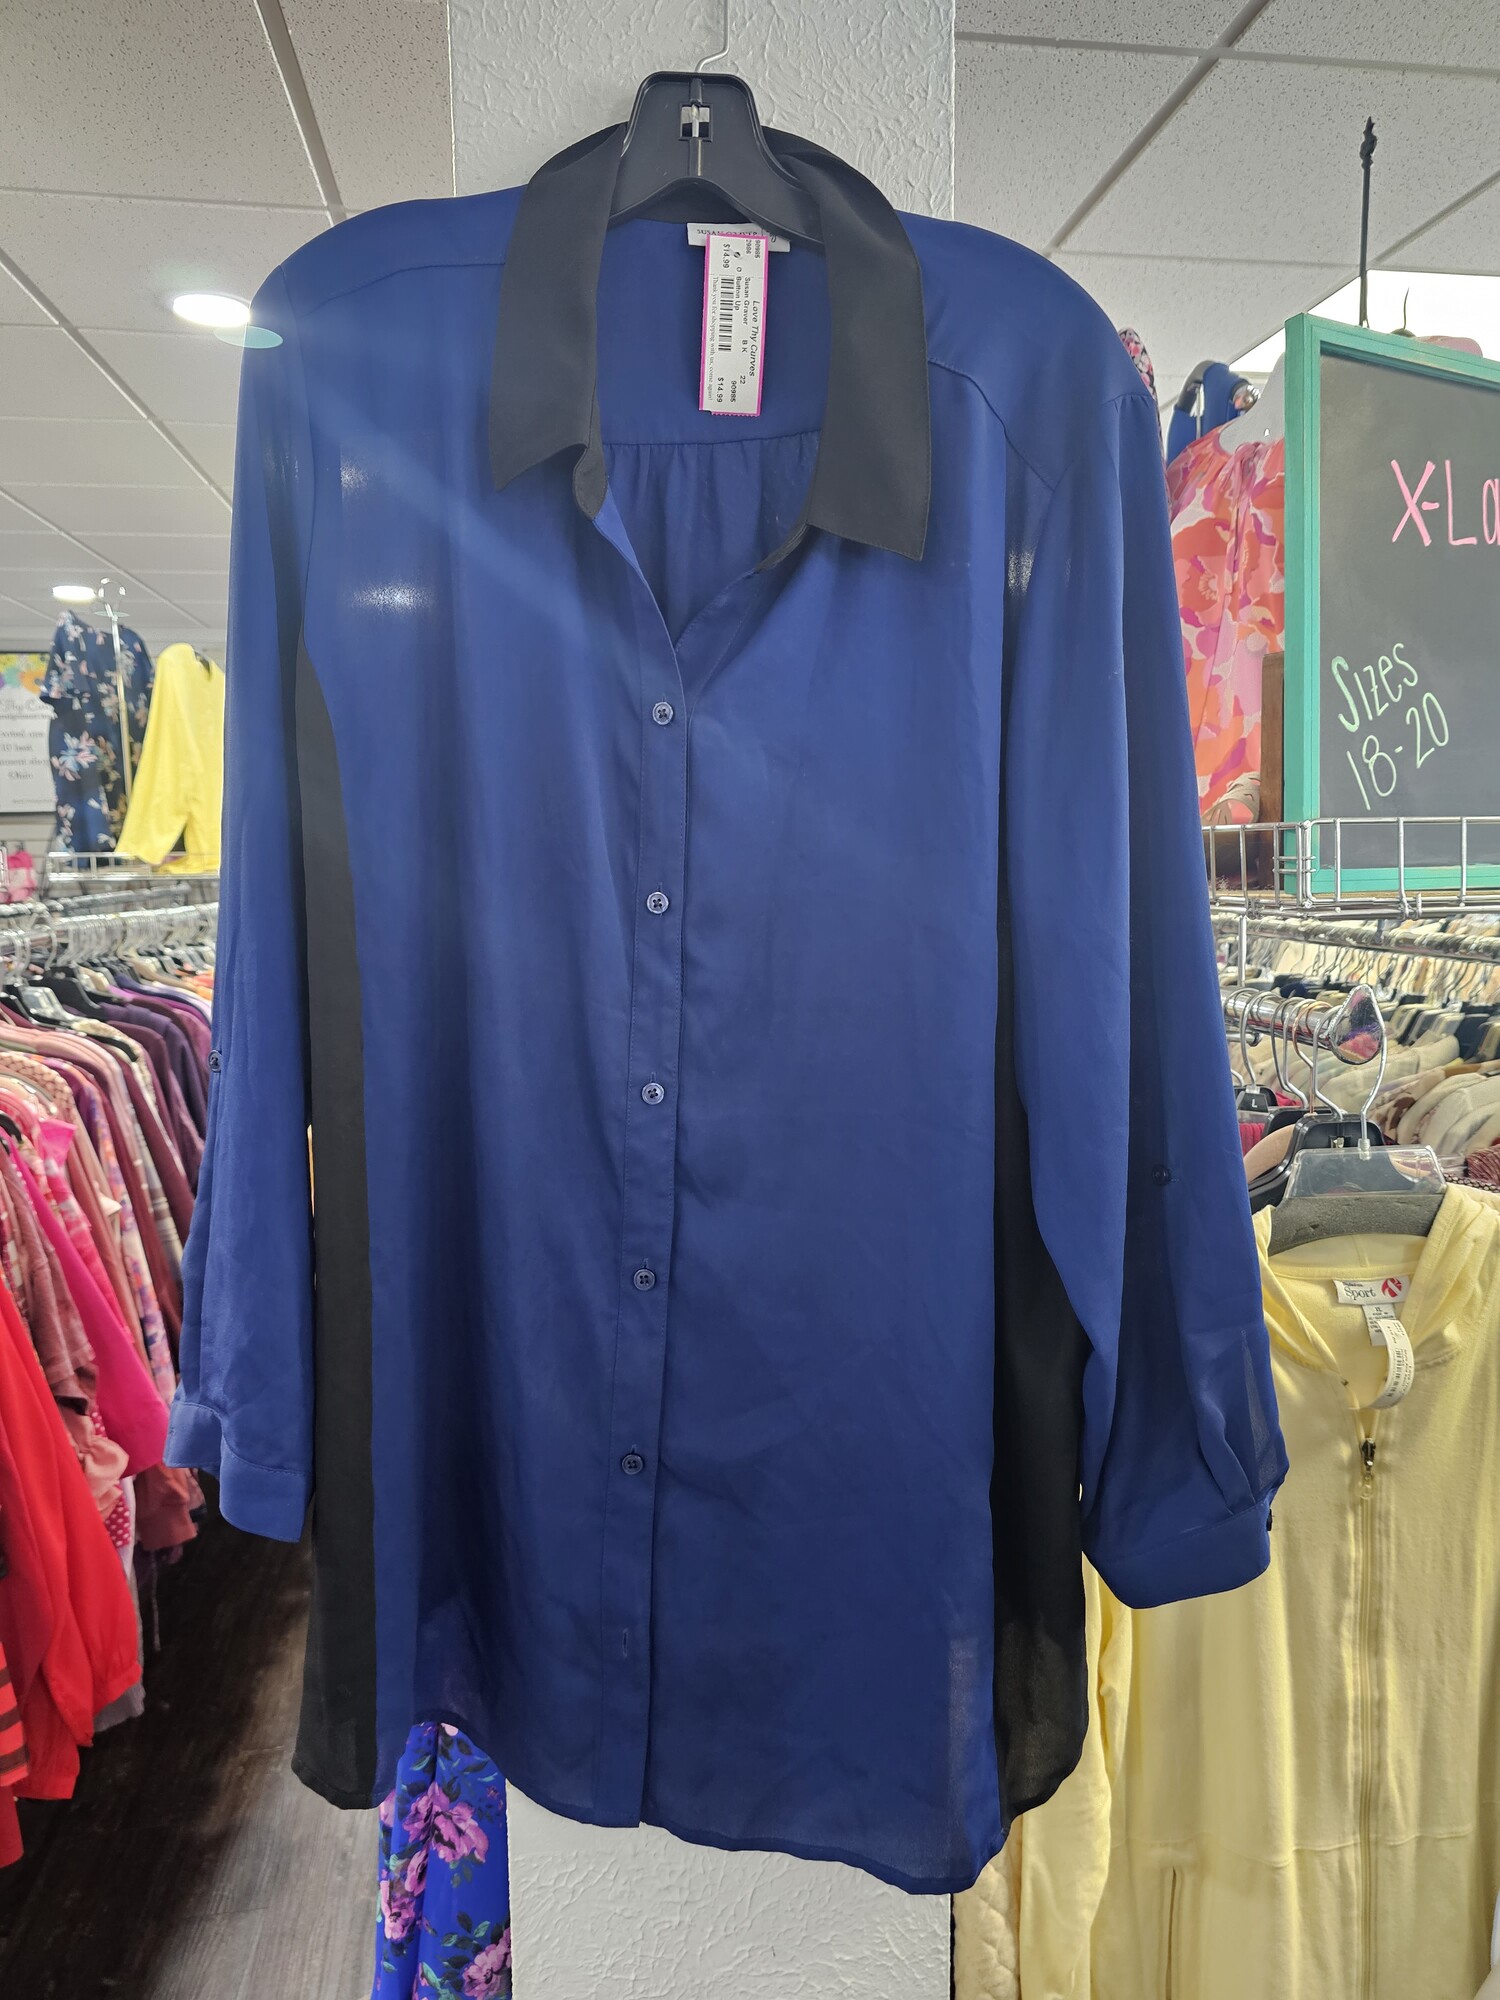 Love this sharp button up blouse in a deep blue and black color. Long sleeves that can be cuffed for versatility.